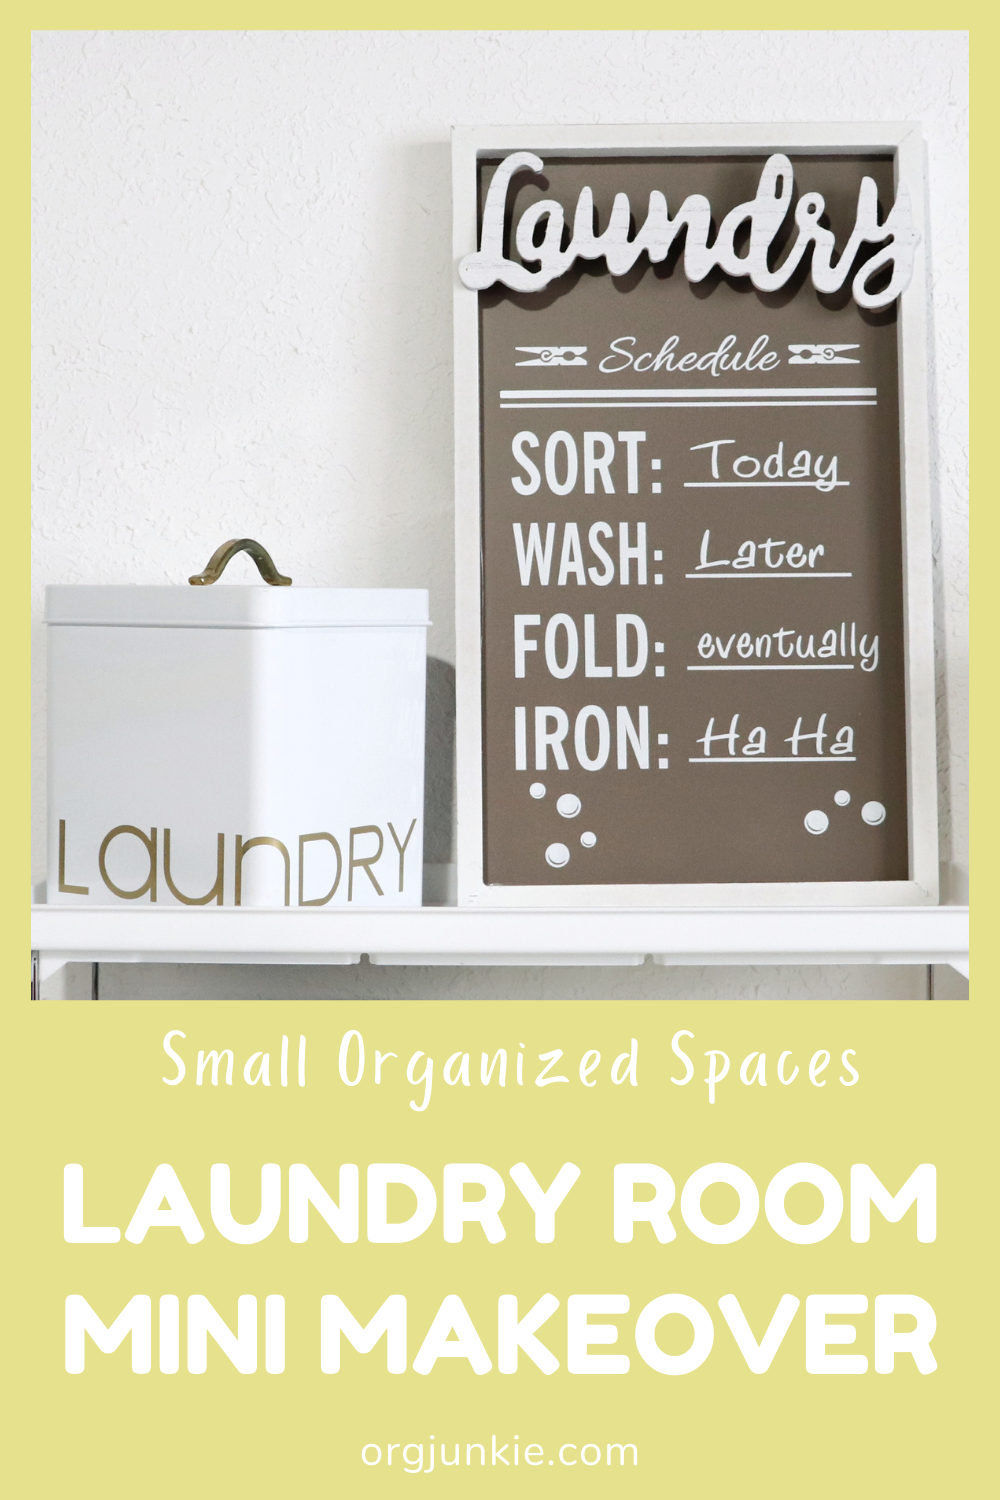 Small Organized Spaces: Inexpensive Mini Laundry Room Makeover at I'm an Organizing Junkie blog